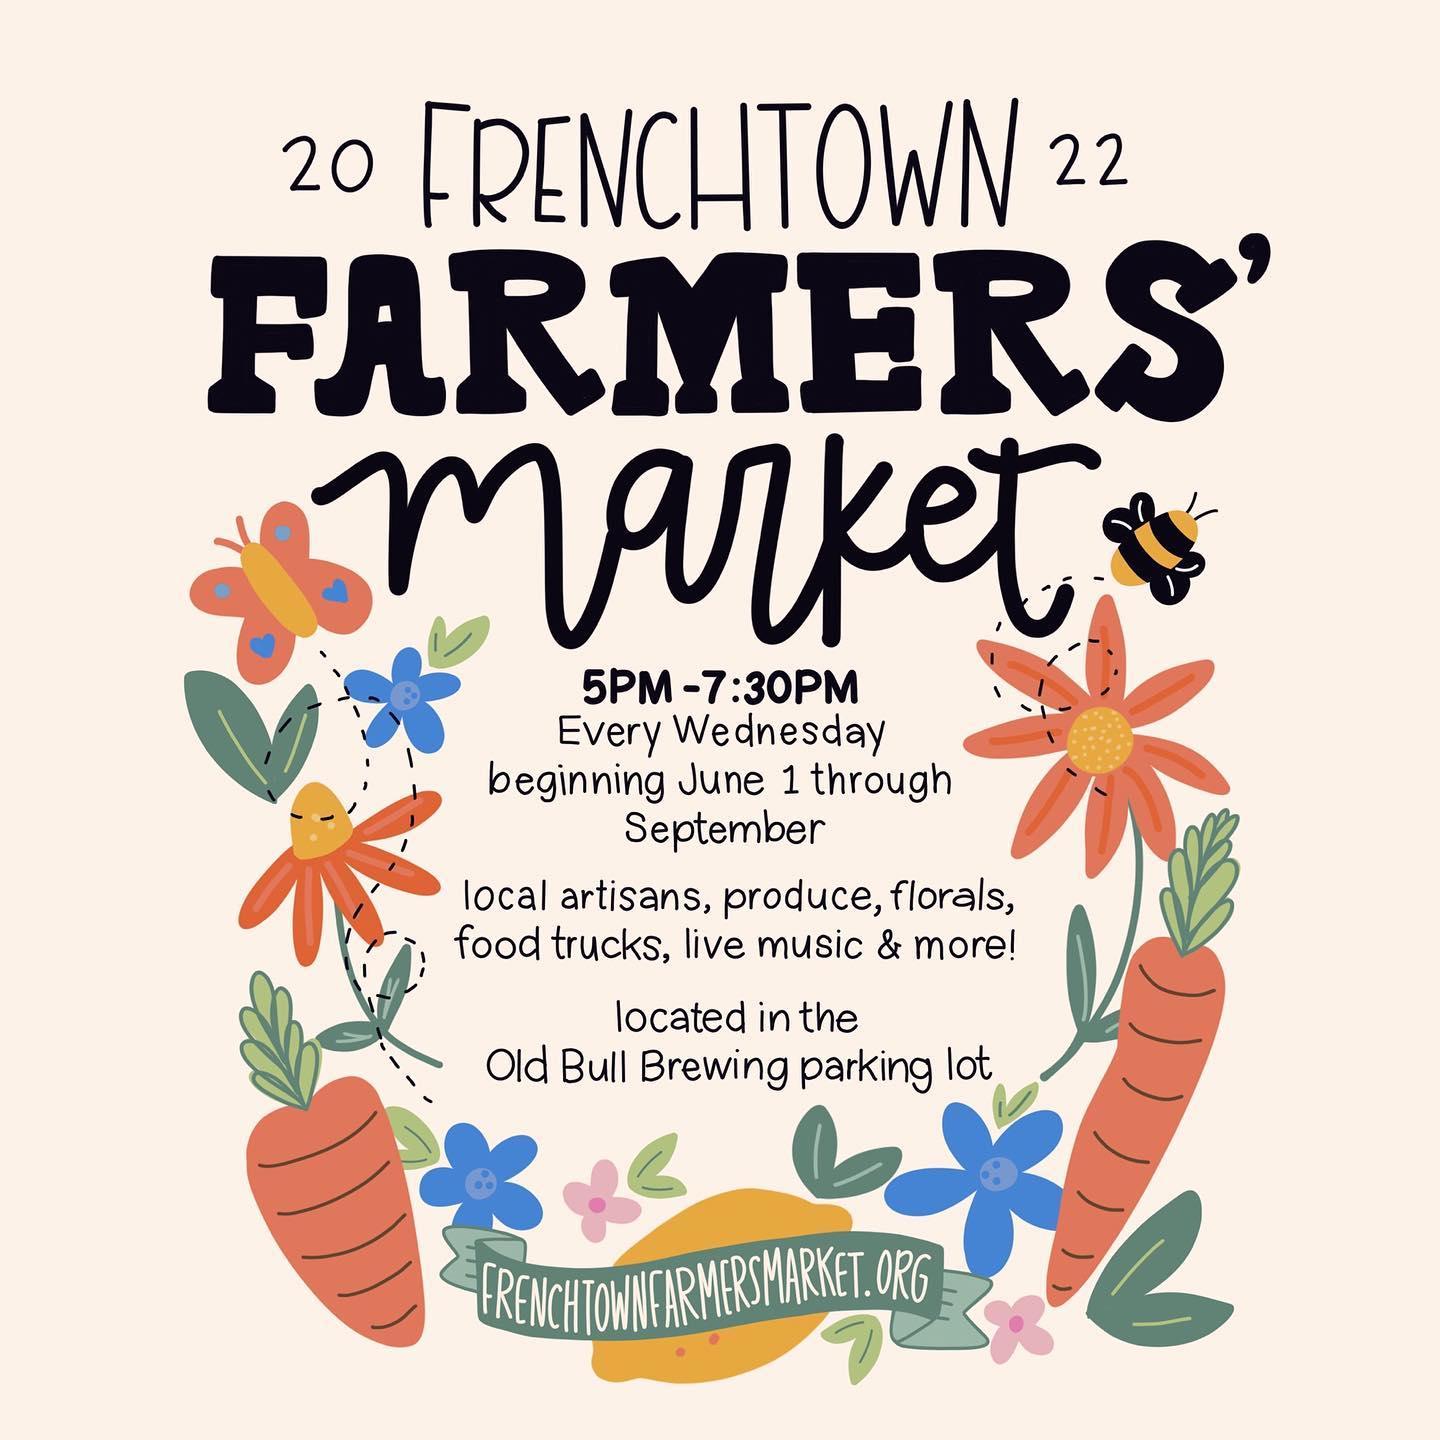 Frenchtown Farmers Market 2022